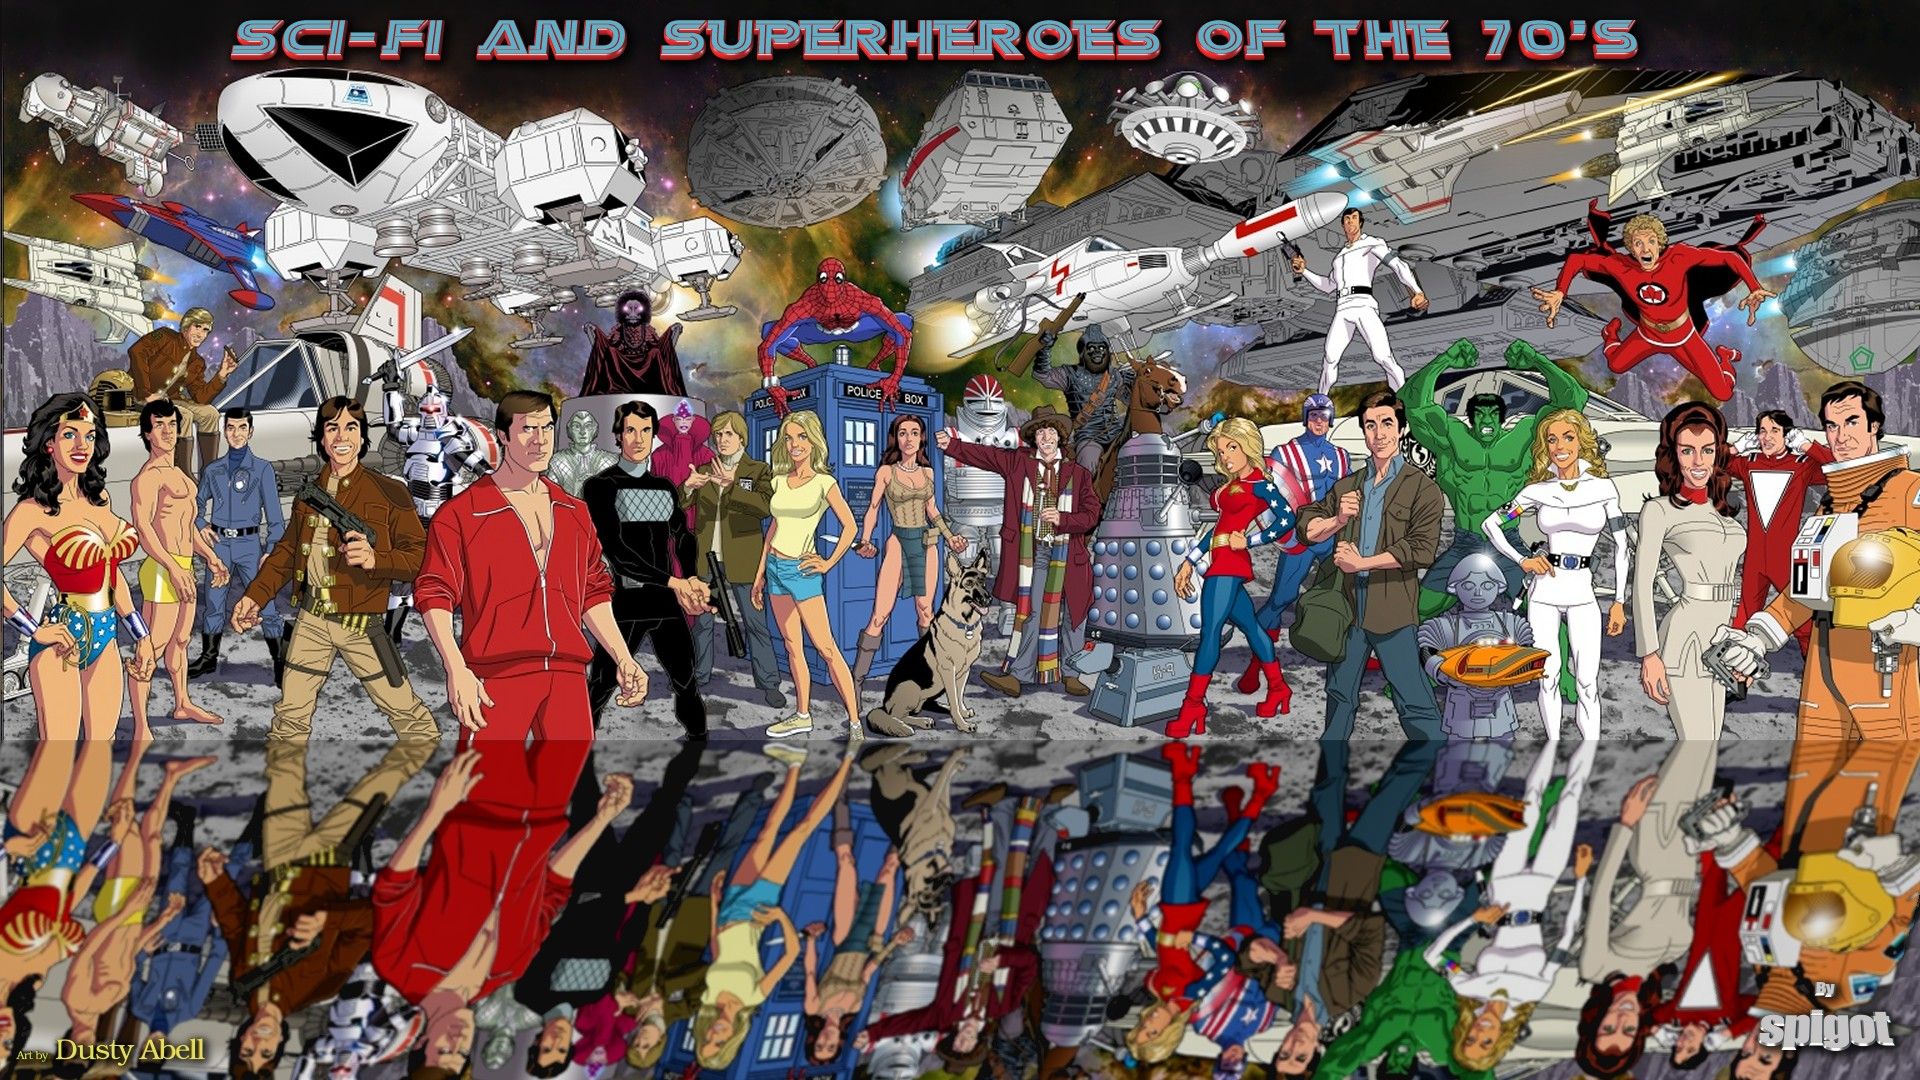 Sci Fi And Superheroes Of The 70's Wallpaper. George Spigot's Blog